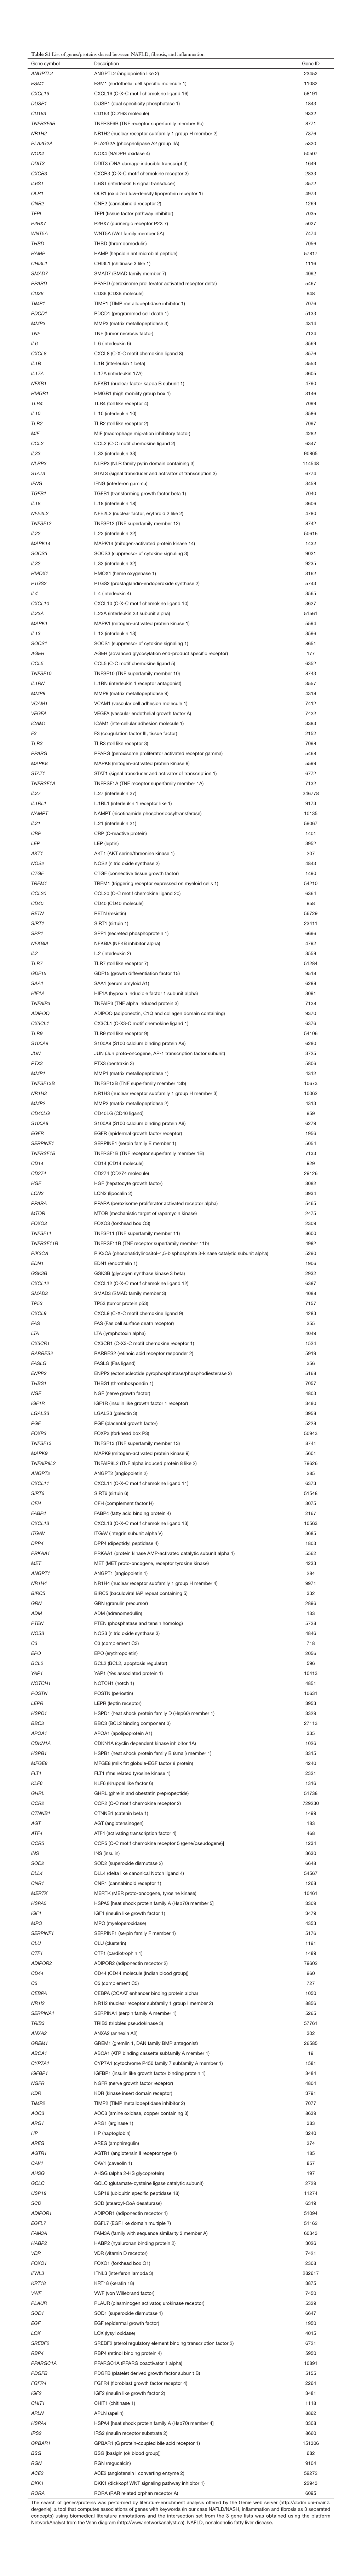 Table S1 List of Genes/Proteins Shared Between NAFLD, Fibrosis, and Inflammation Gene Symbol Description Gene ID